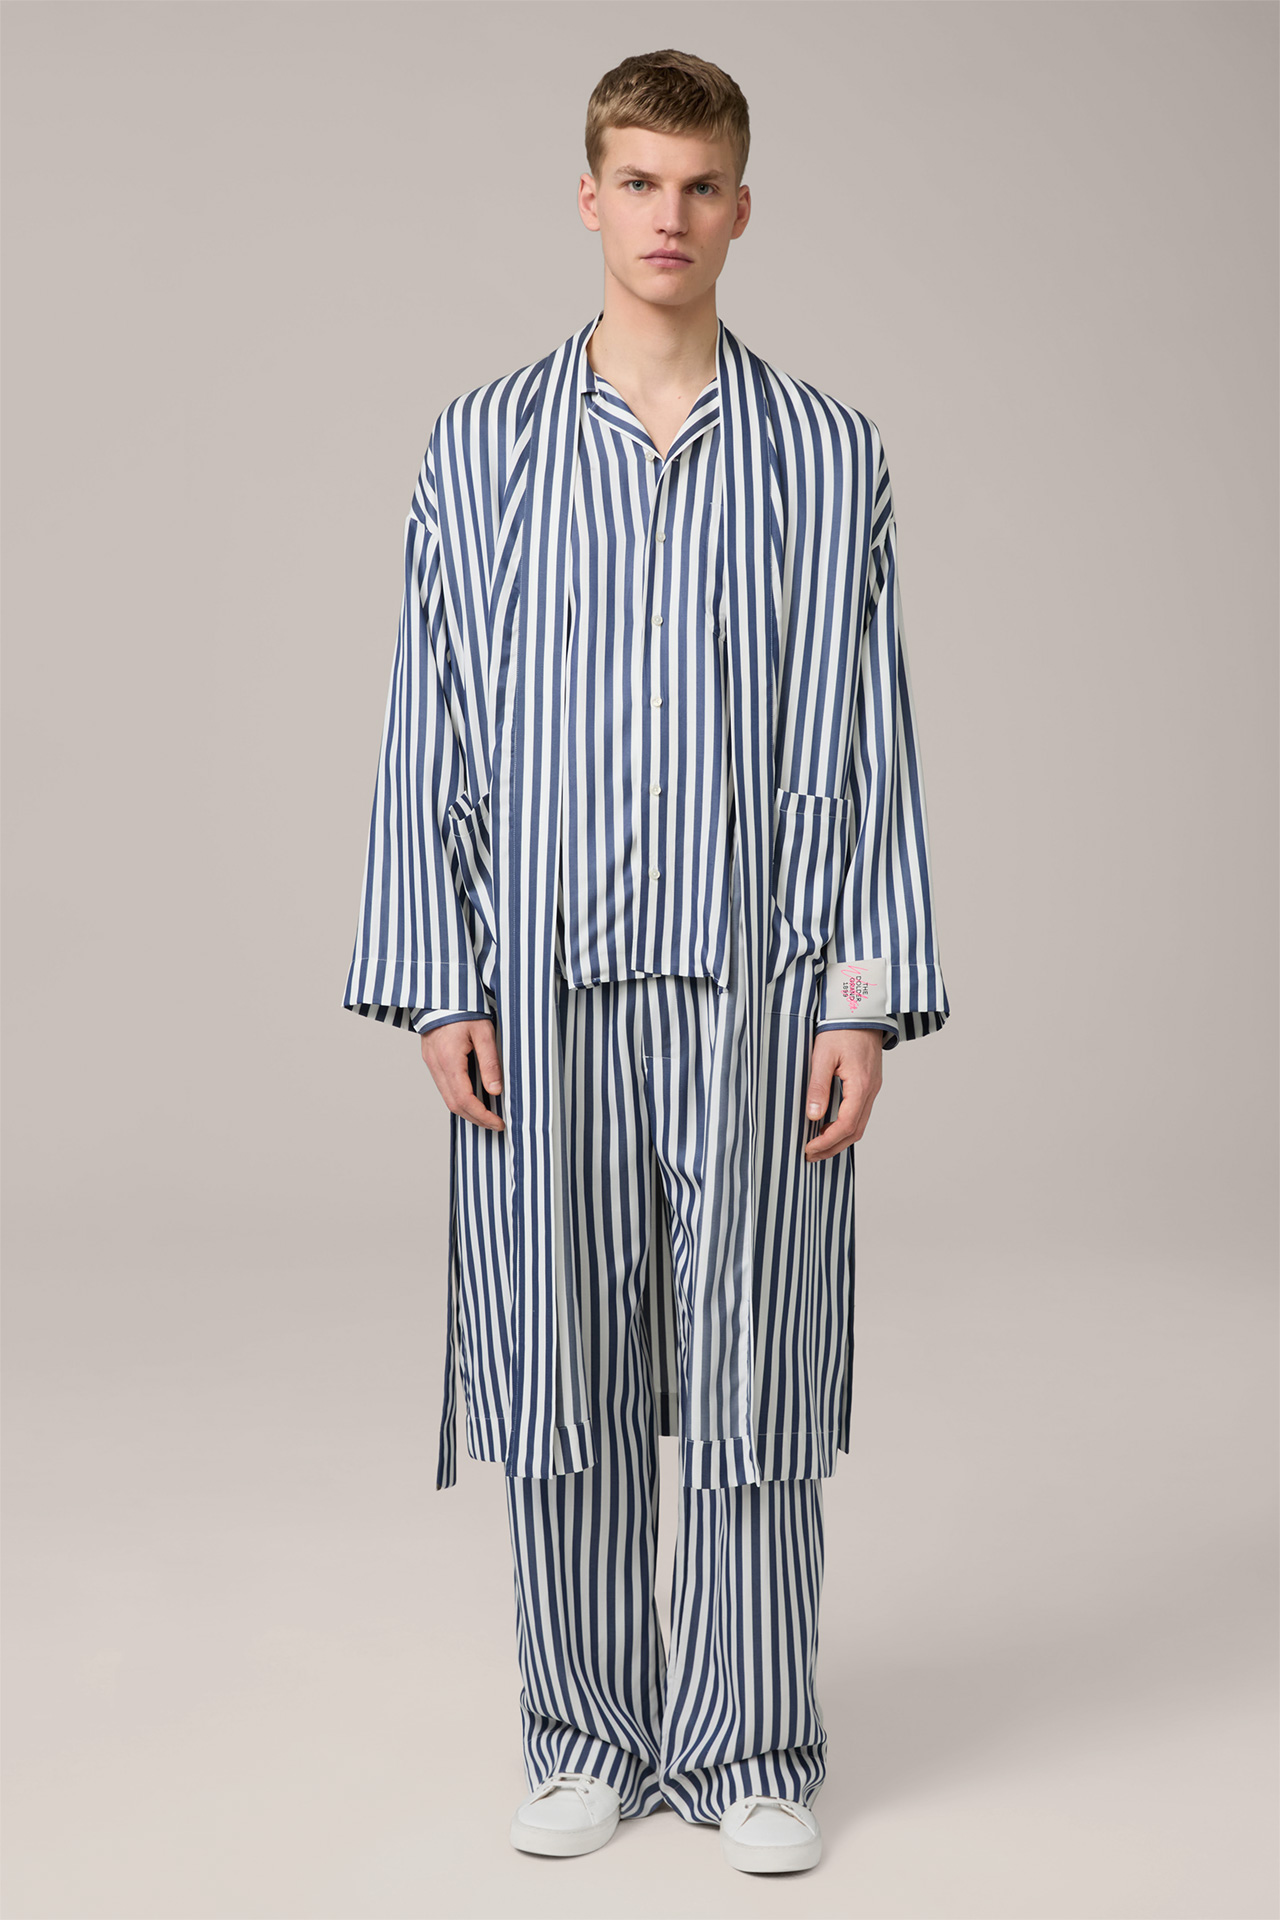 Unisex navy striped lyocell dressing gown